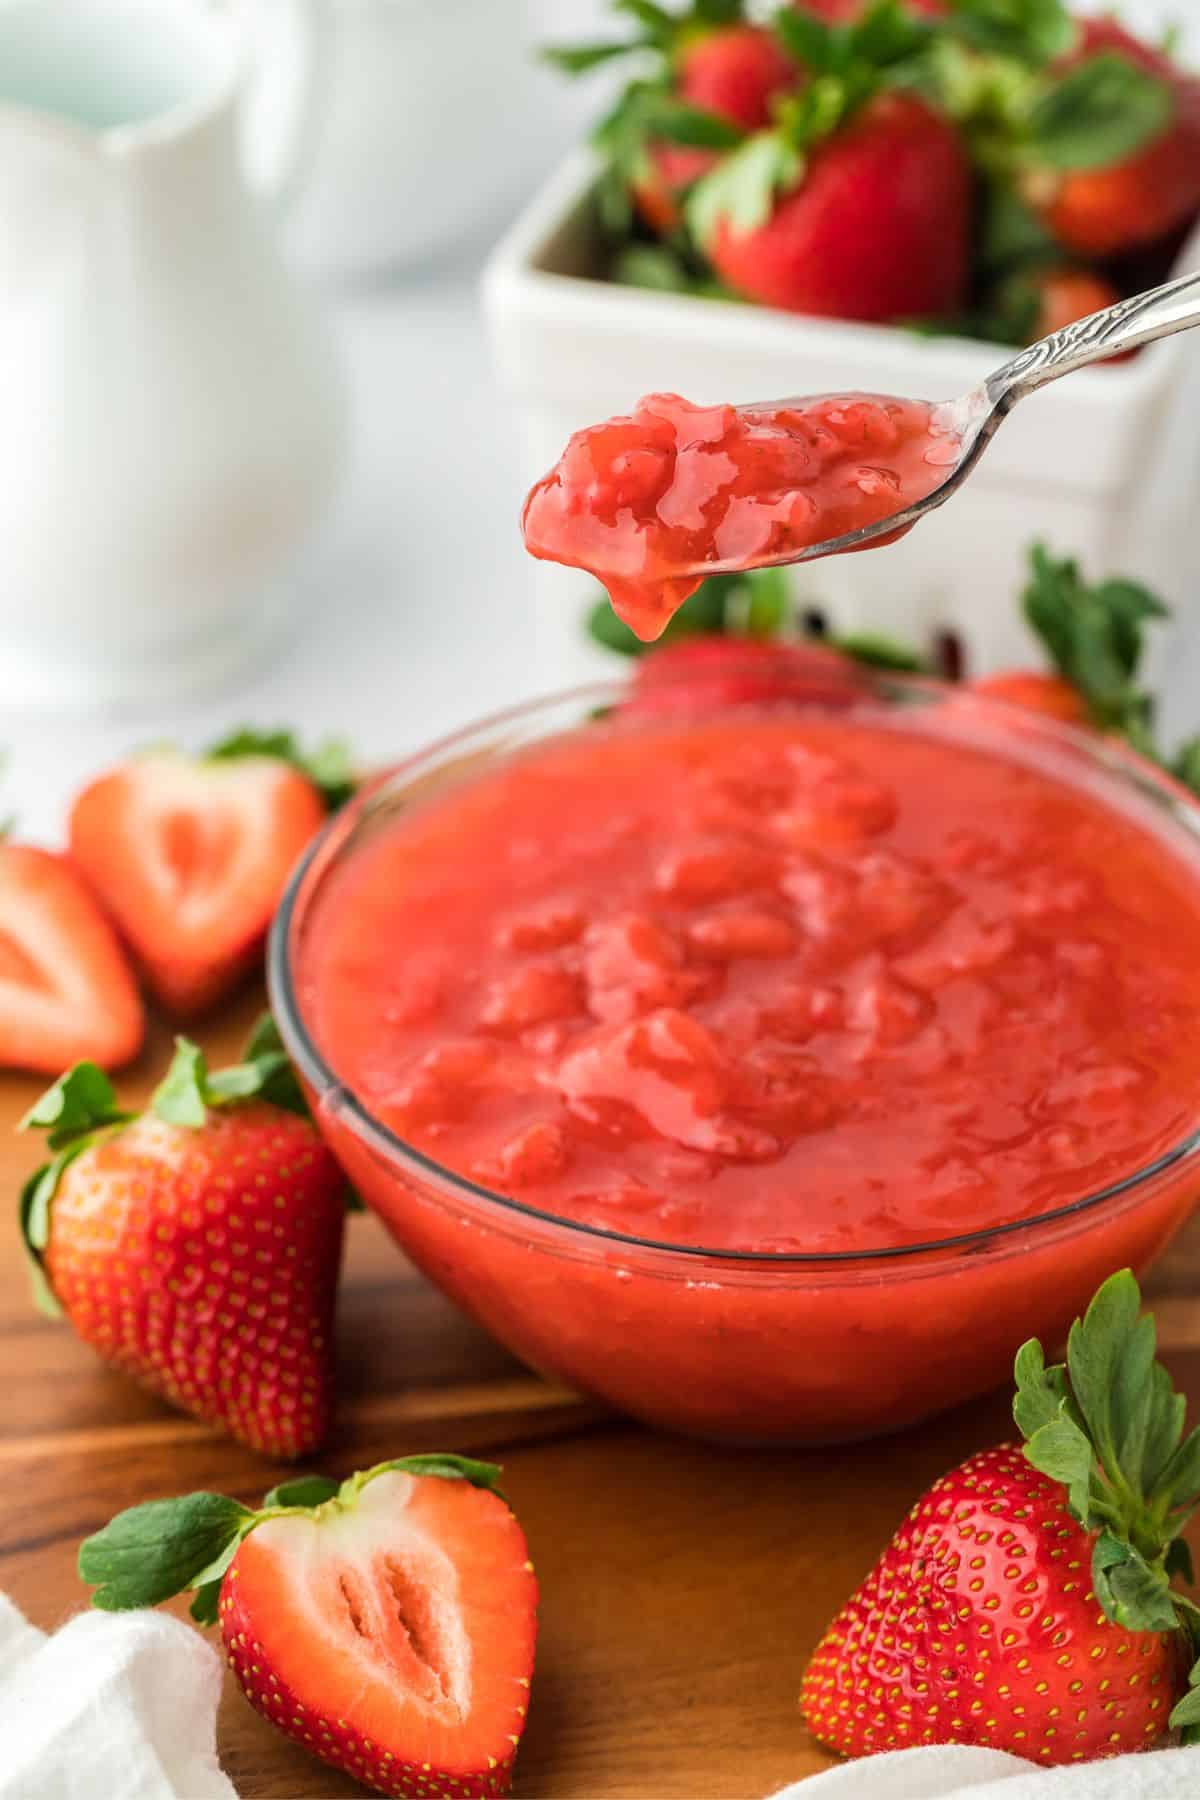 A spoon lifting a portion of strawberry sauce from a clear glass bowl. The bowl is surrounded by whole and halved fresh strawberries on a wooden surface. In the background, there's a white pitcher and a square white bowl with more strawberries